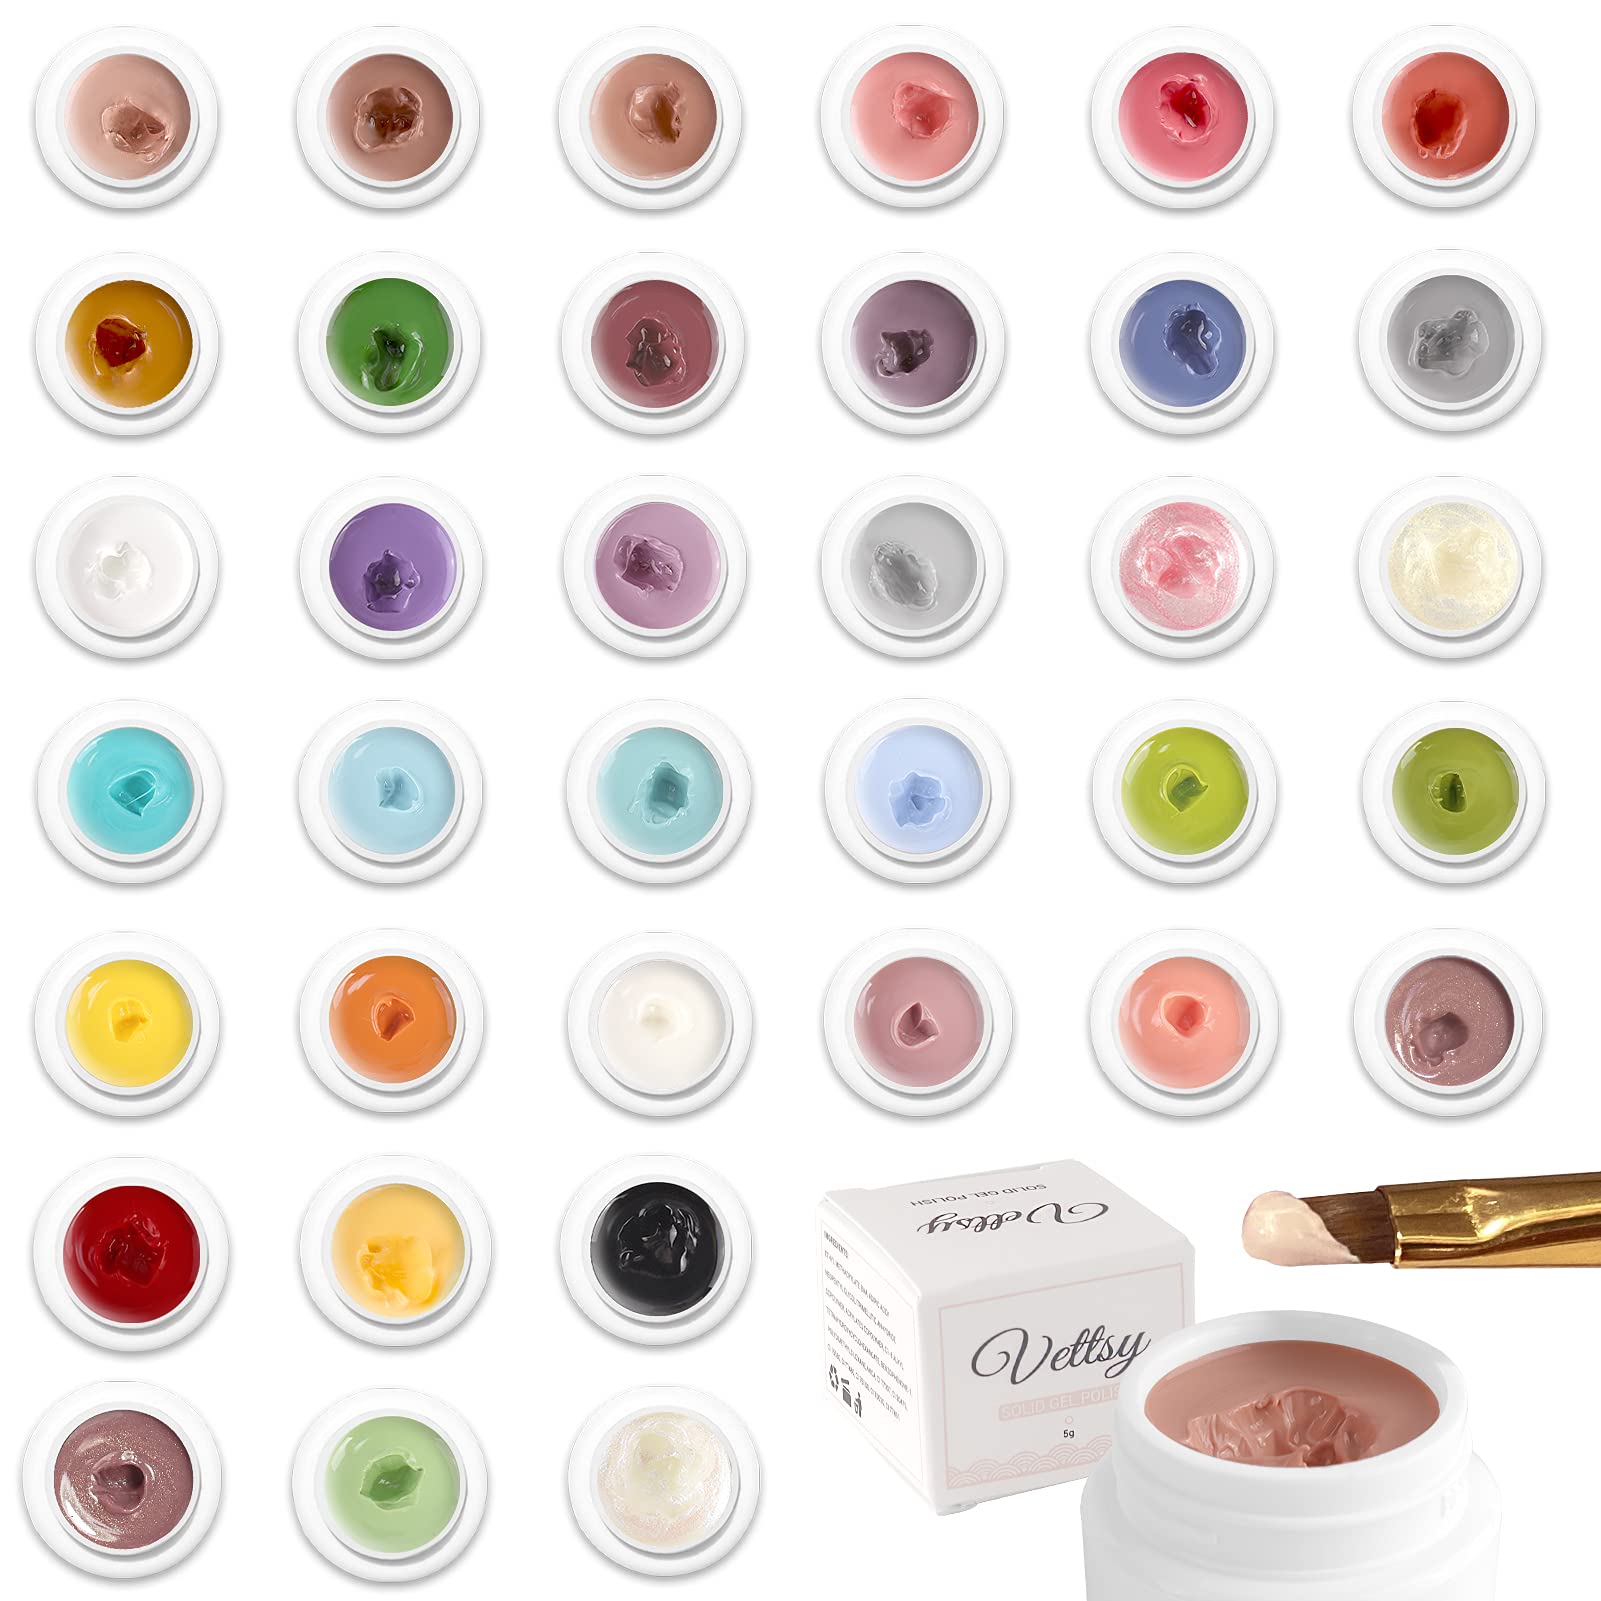 Vettsy Solid Pudding Gel Polish 36 Colors Set, Highly Pigmented Solid Cream Gel Polish Set with Brush and Color Swatches, Perfect Nail Polish Kit f...